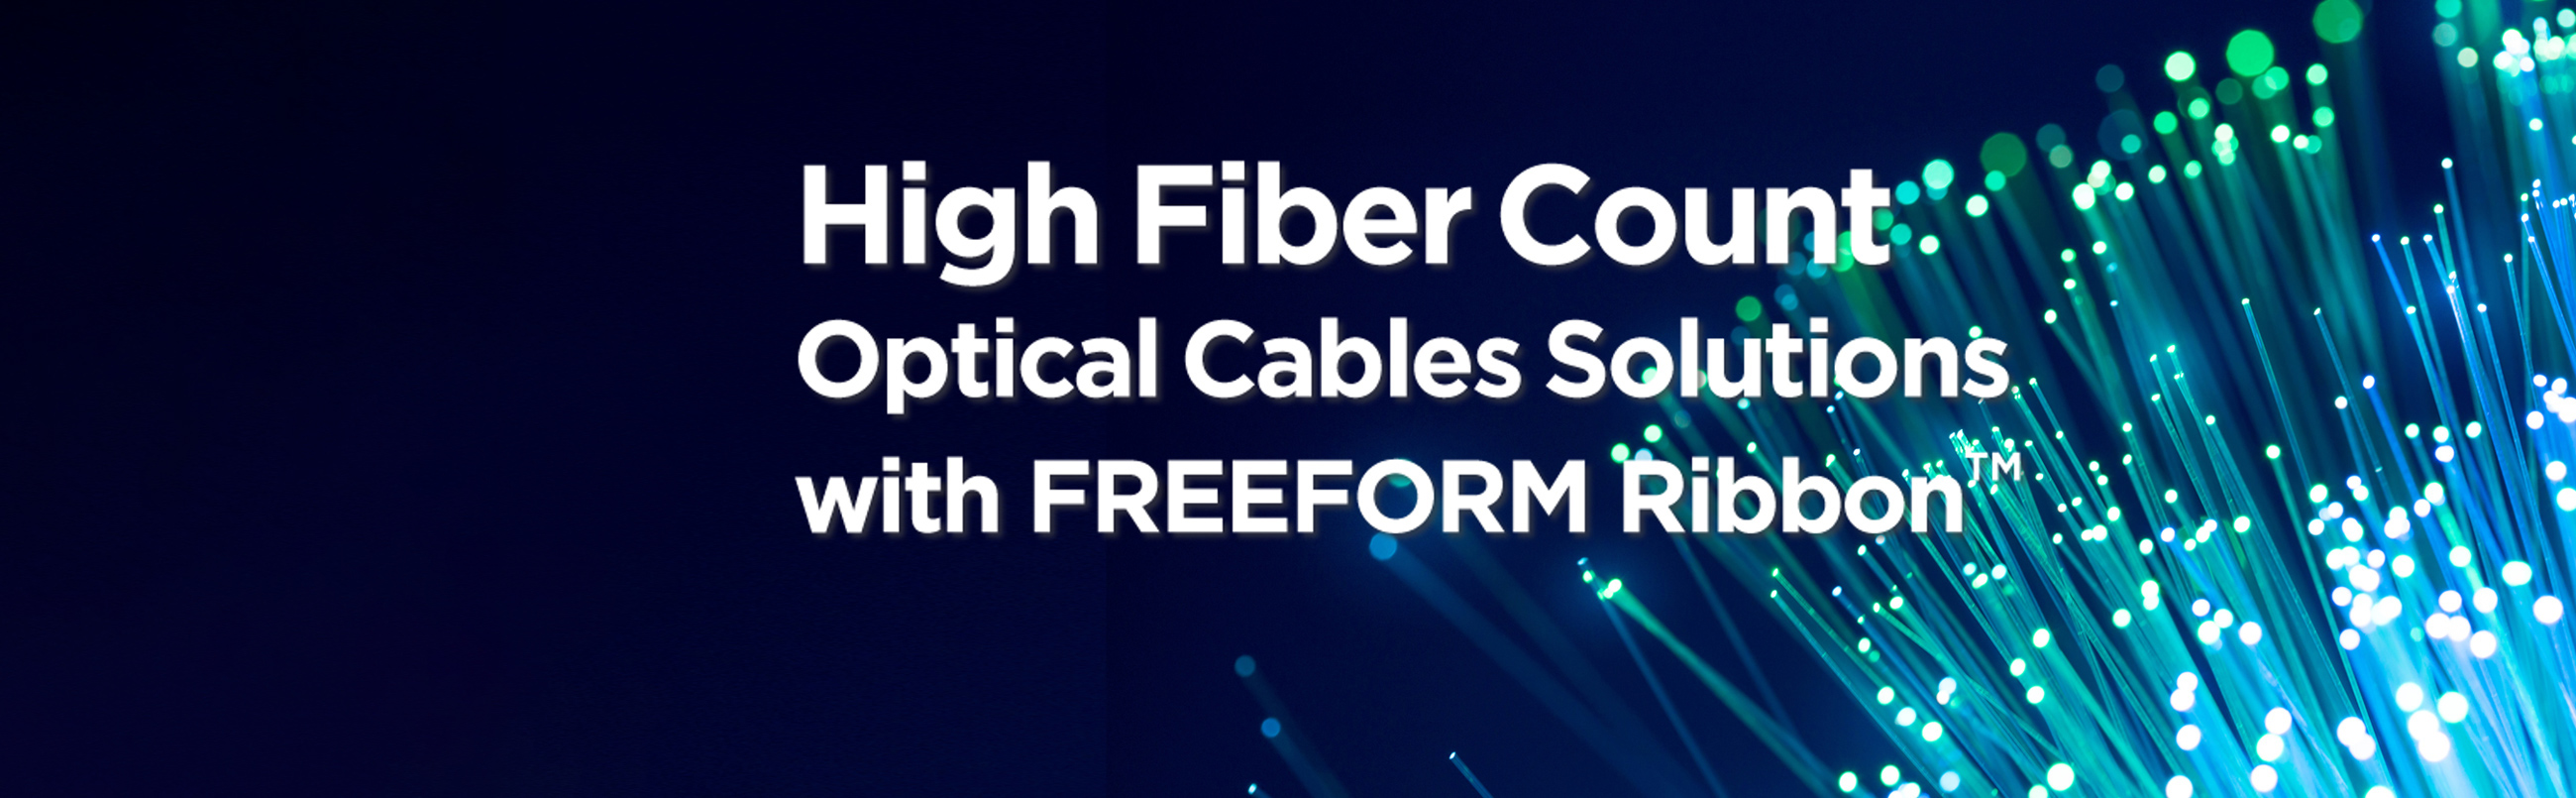 High Fiber Count Optical Cable